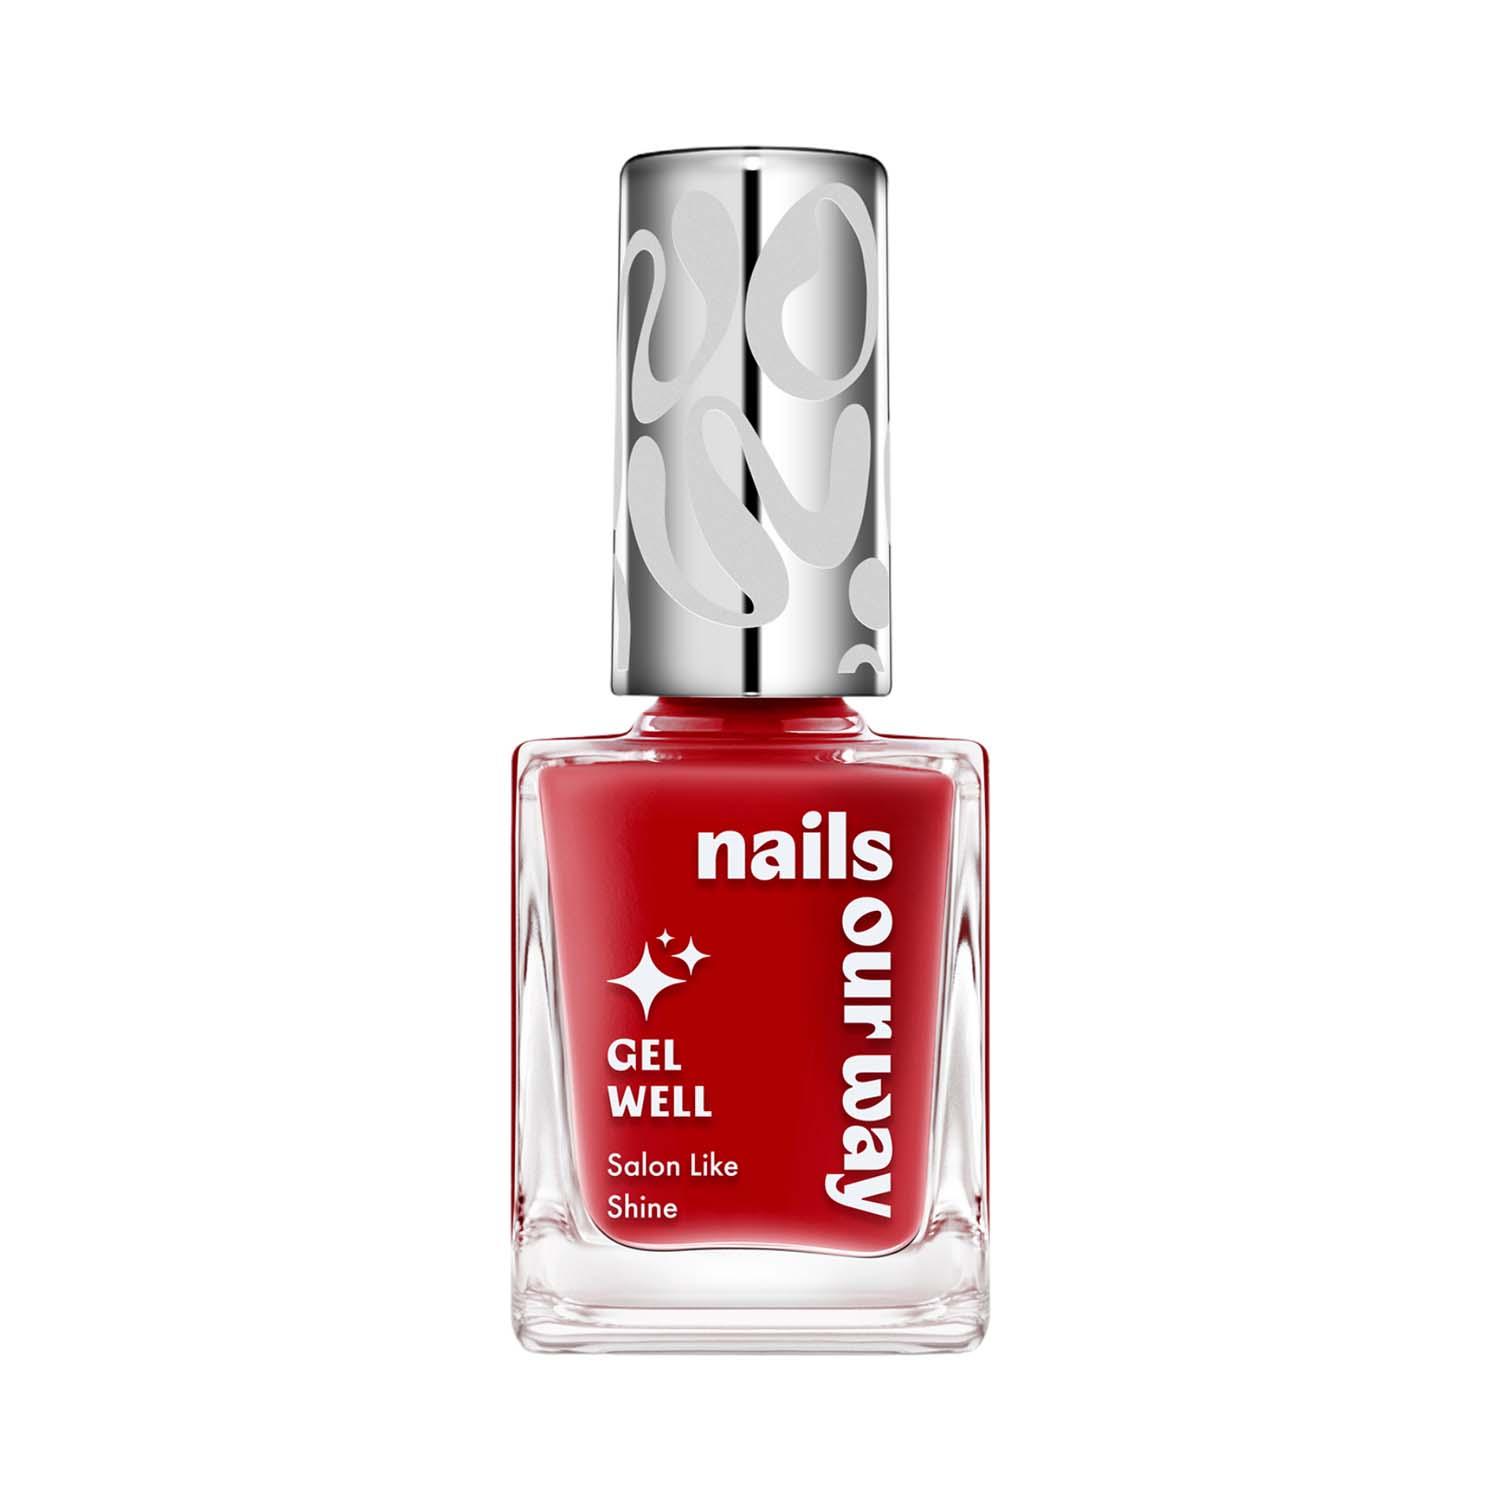 Nails Our Way | Nails Our Way Gel Well Nail Enamel - 103 Vivacious (10 ml)